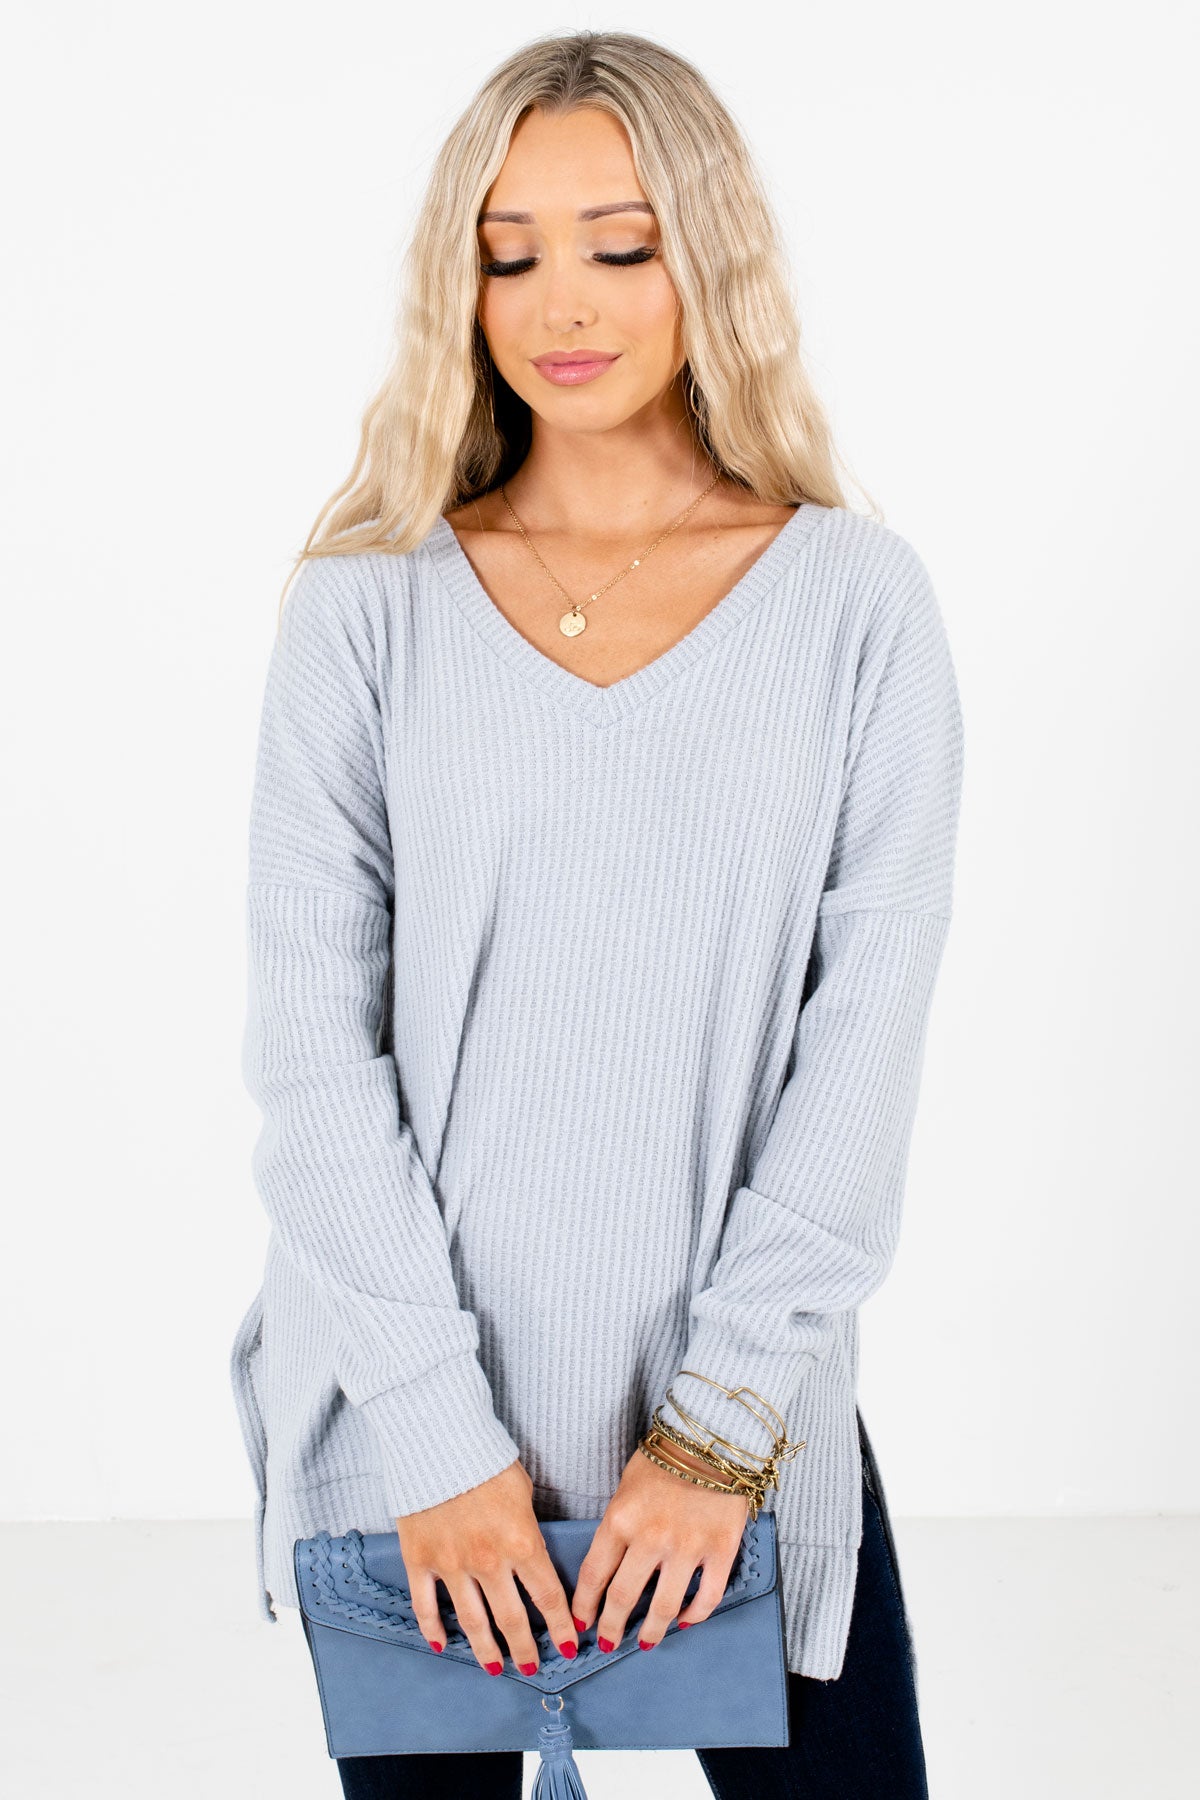 Women’s Gray Casual Everyday Boutique Tops